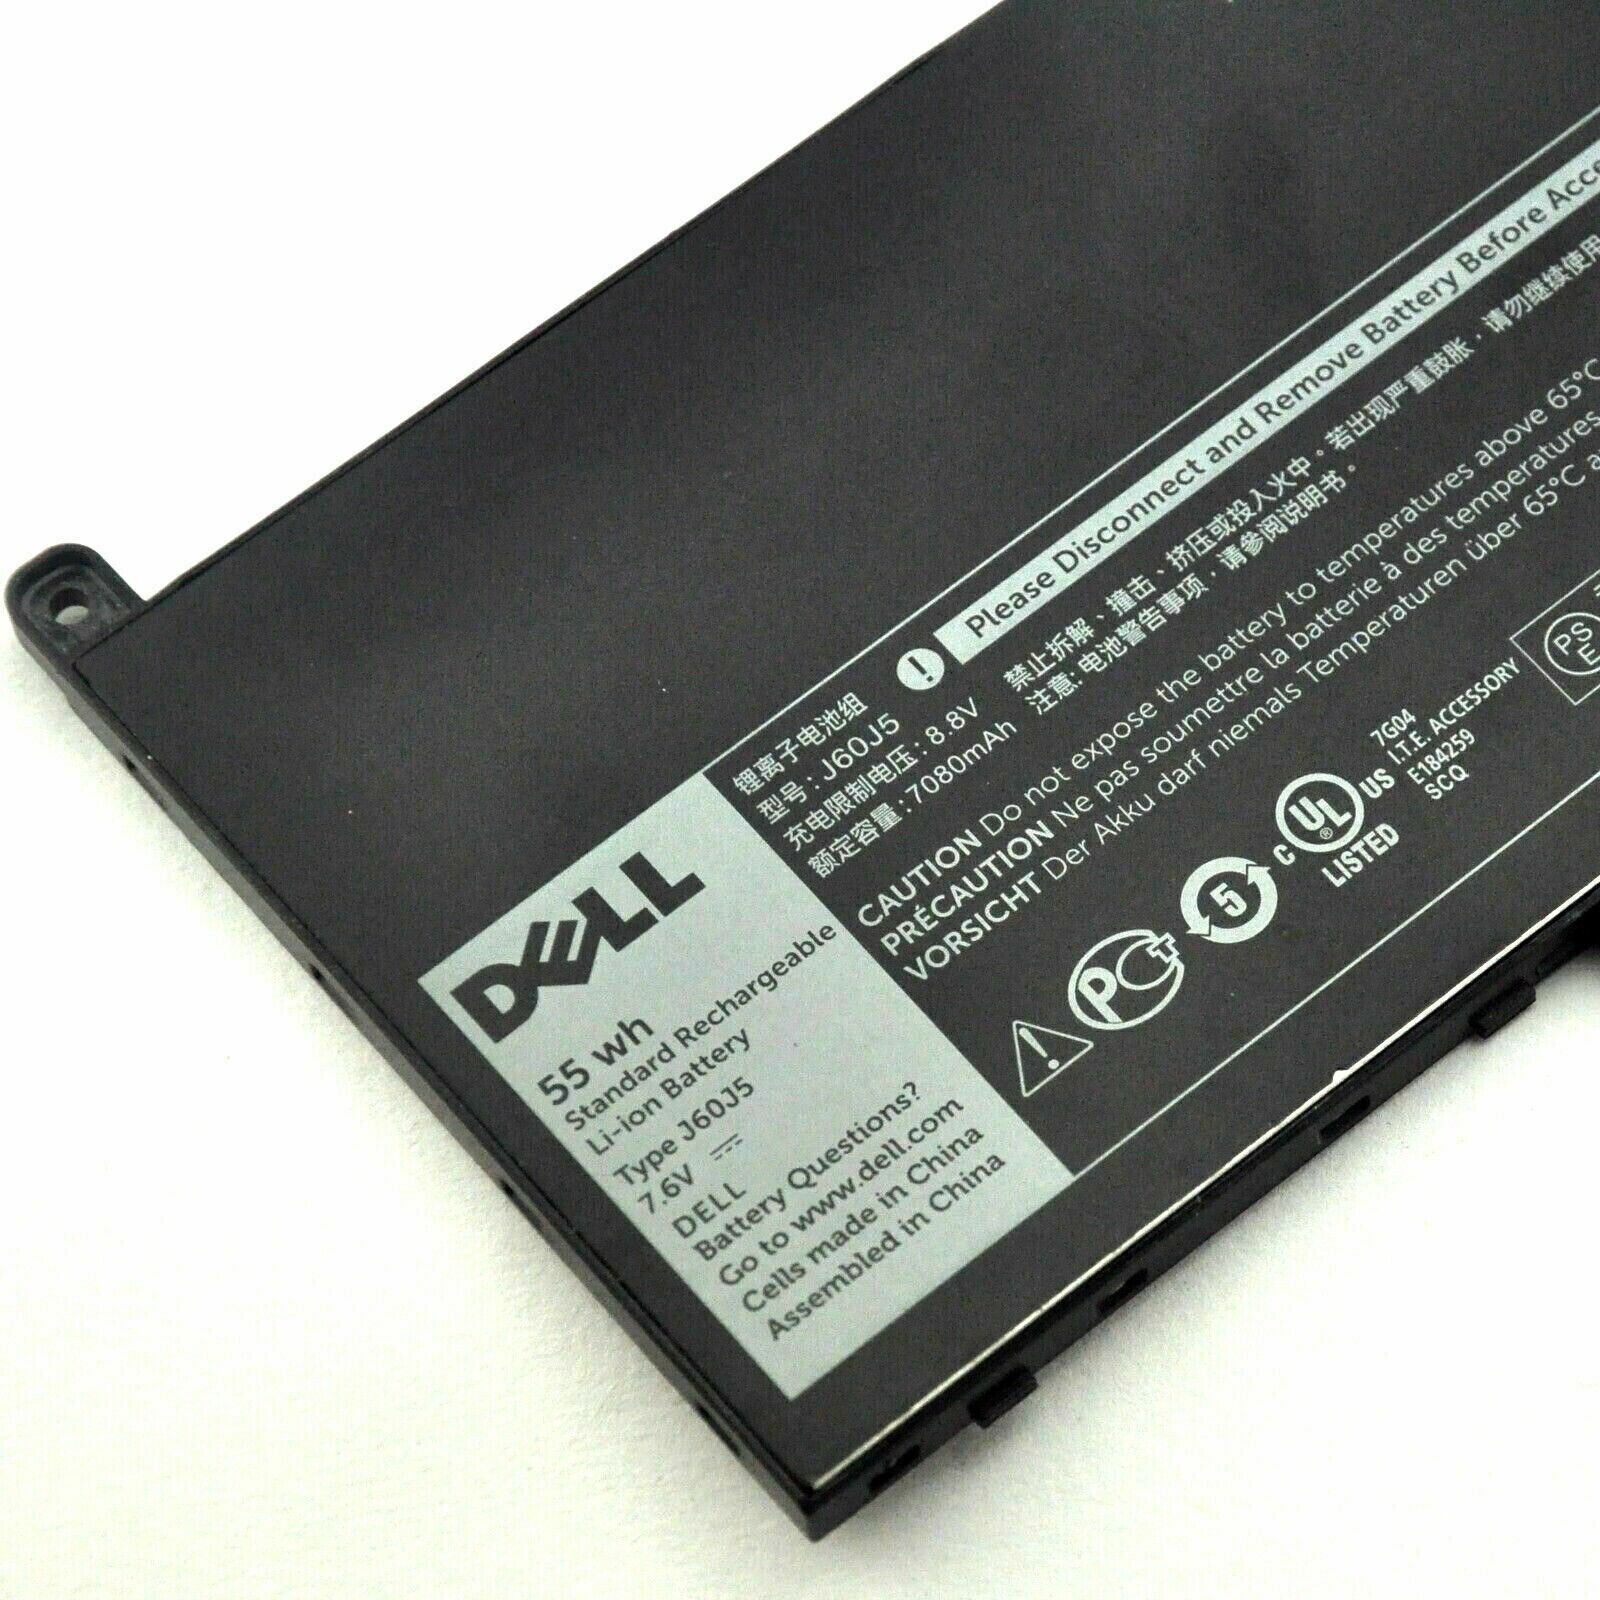 New OEM 55Wh J60J5 Battery for Dell Latitude E7270 E7470 55Wh MC34Y 1W2Y2 242D